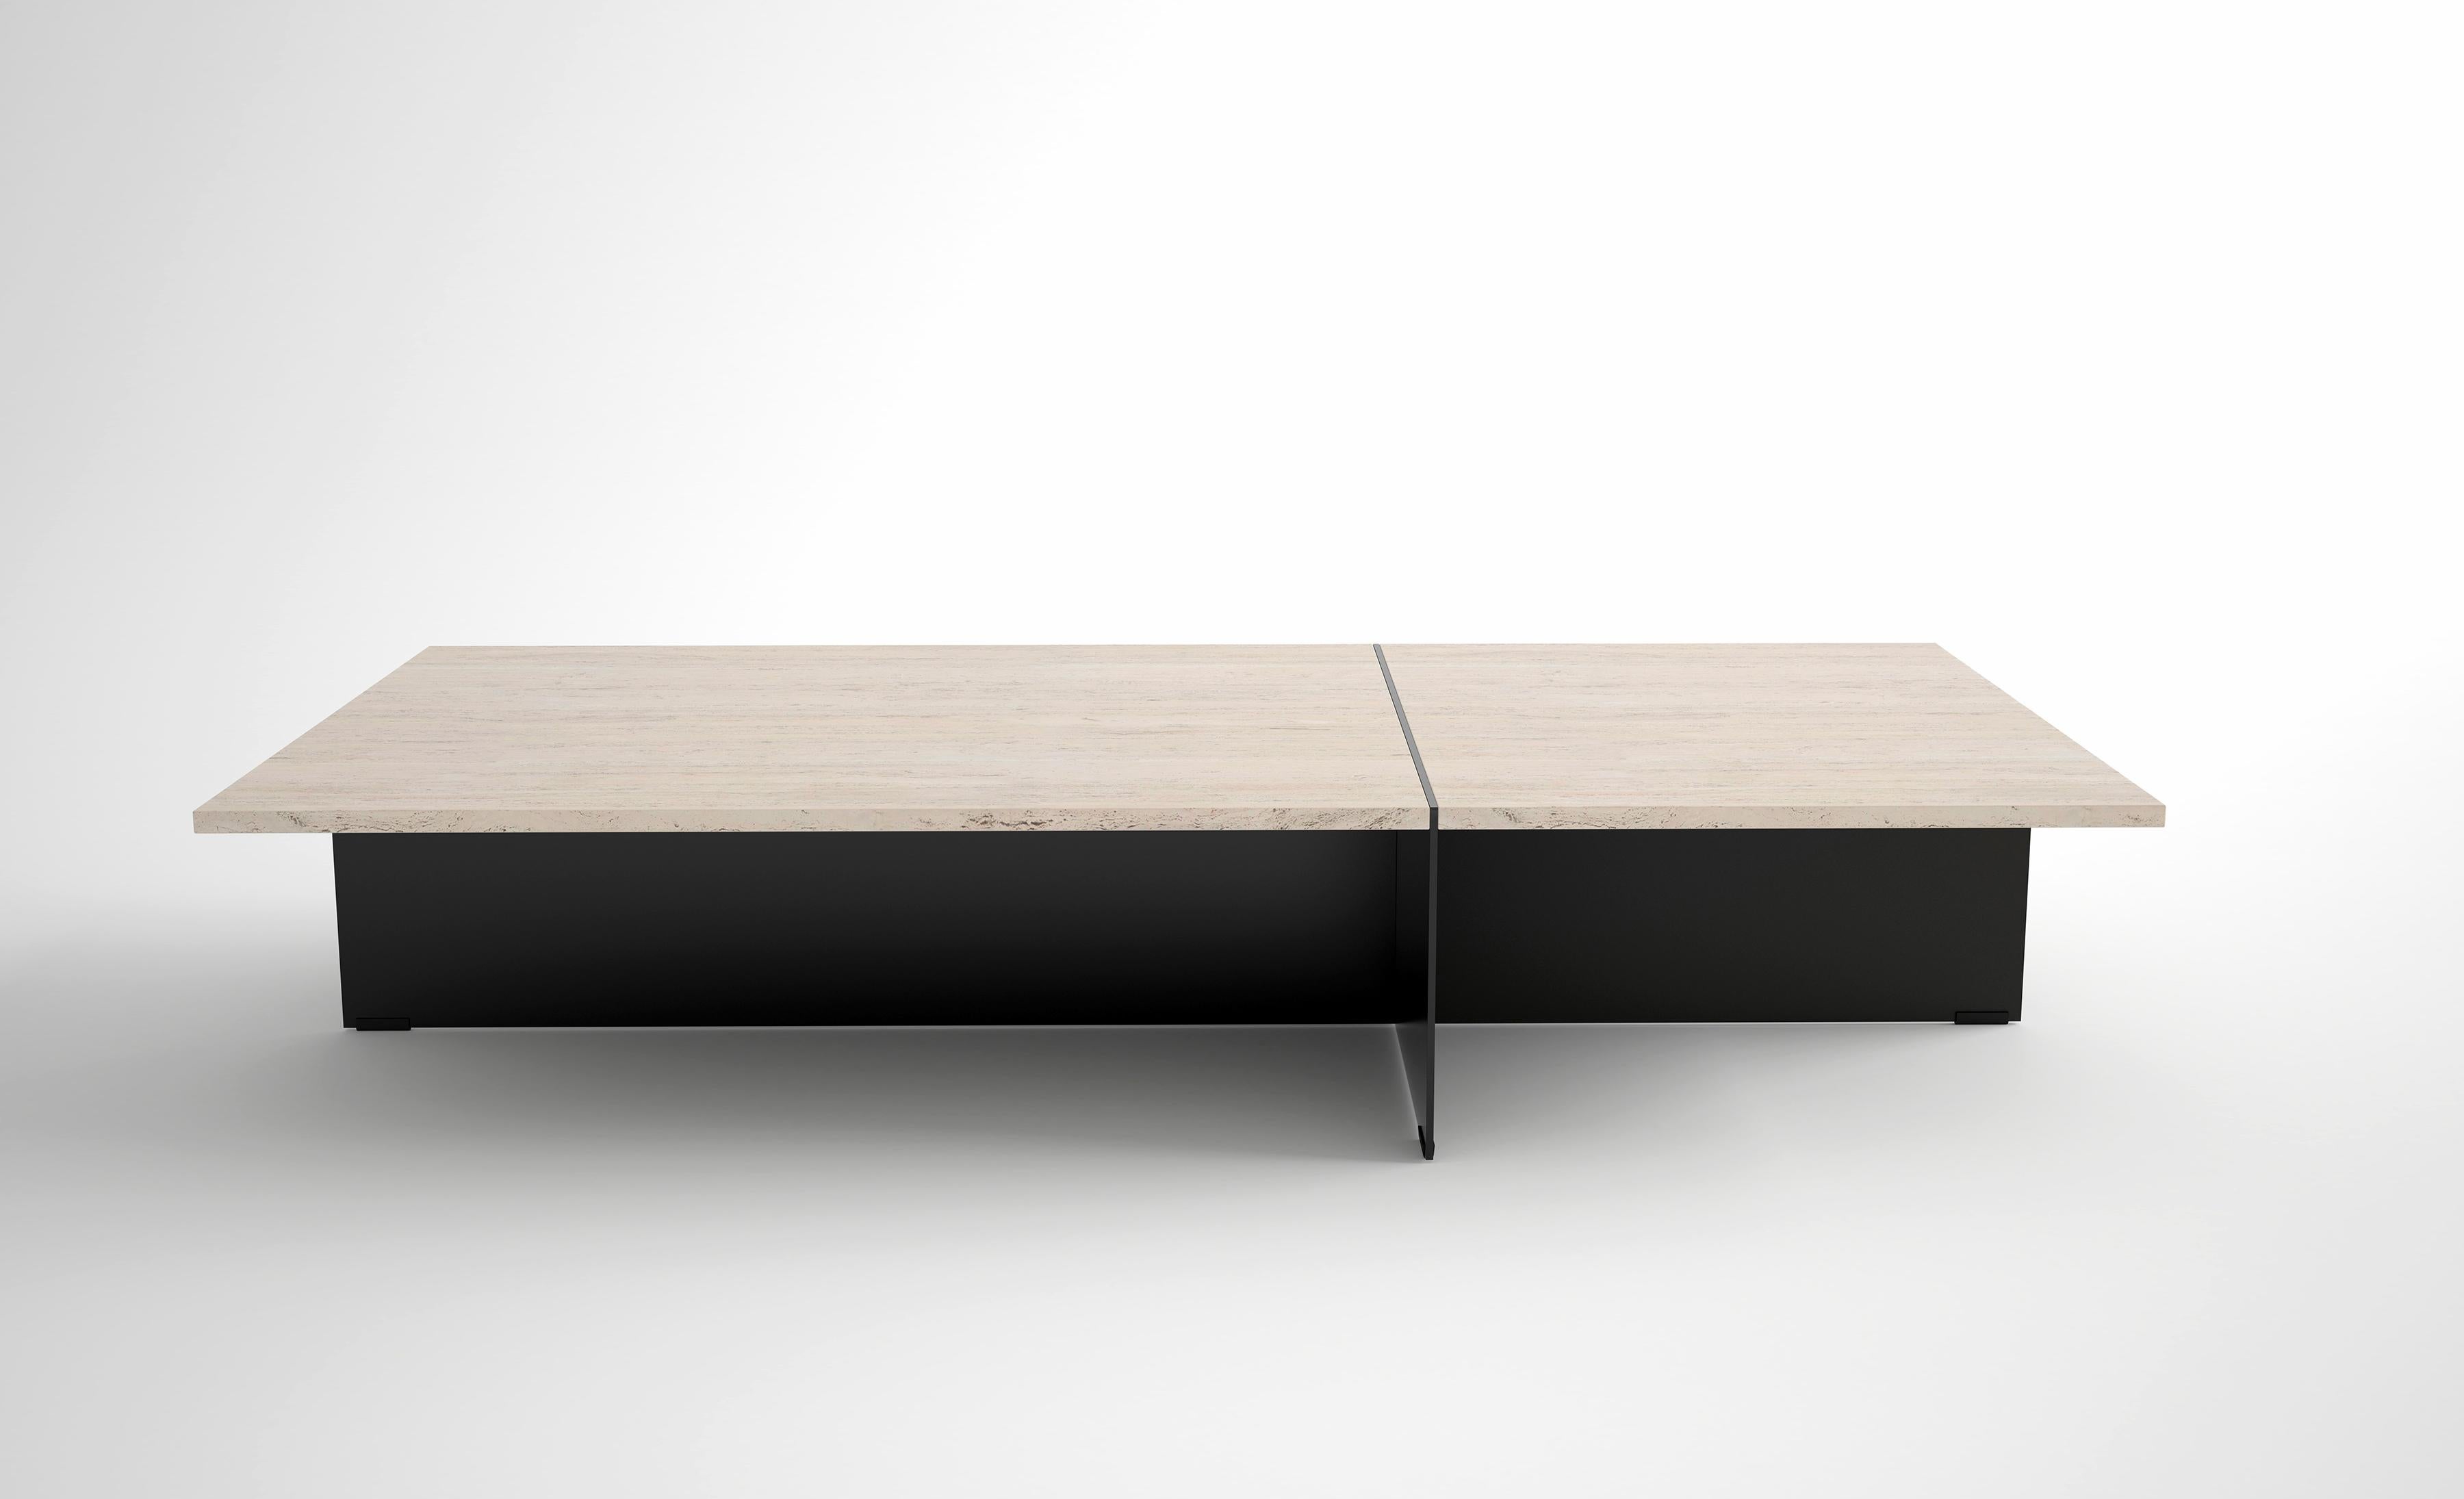 Division Rectangular Coffee Table by Phase Design
Dimensions: D 81,3 x W 162,6 x H 30,5 cm. 
Materials: Powder-coated solid steel and white Carrara marble.

Solid steel sheet available in a flat black or white powder coat finish. Powder coat